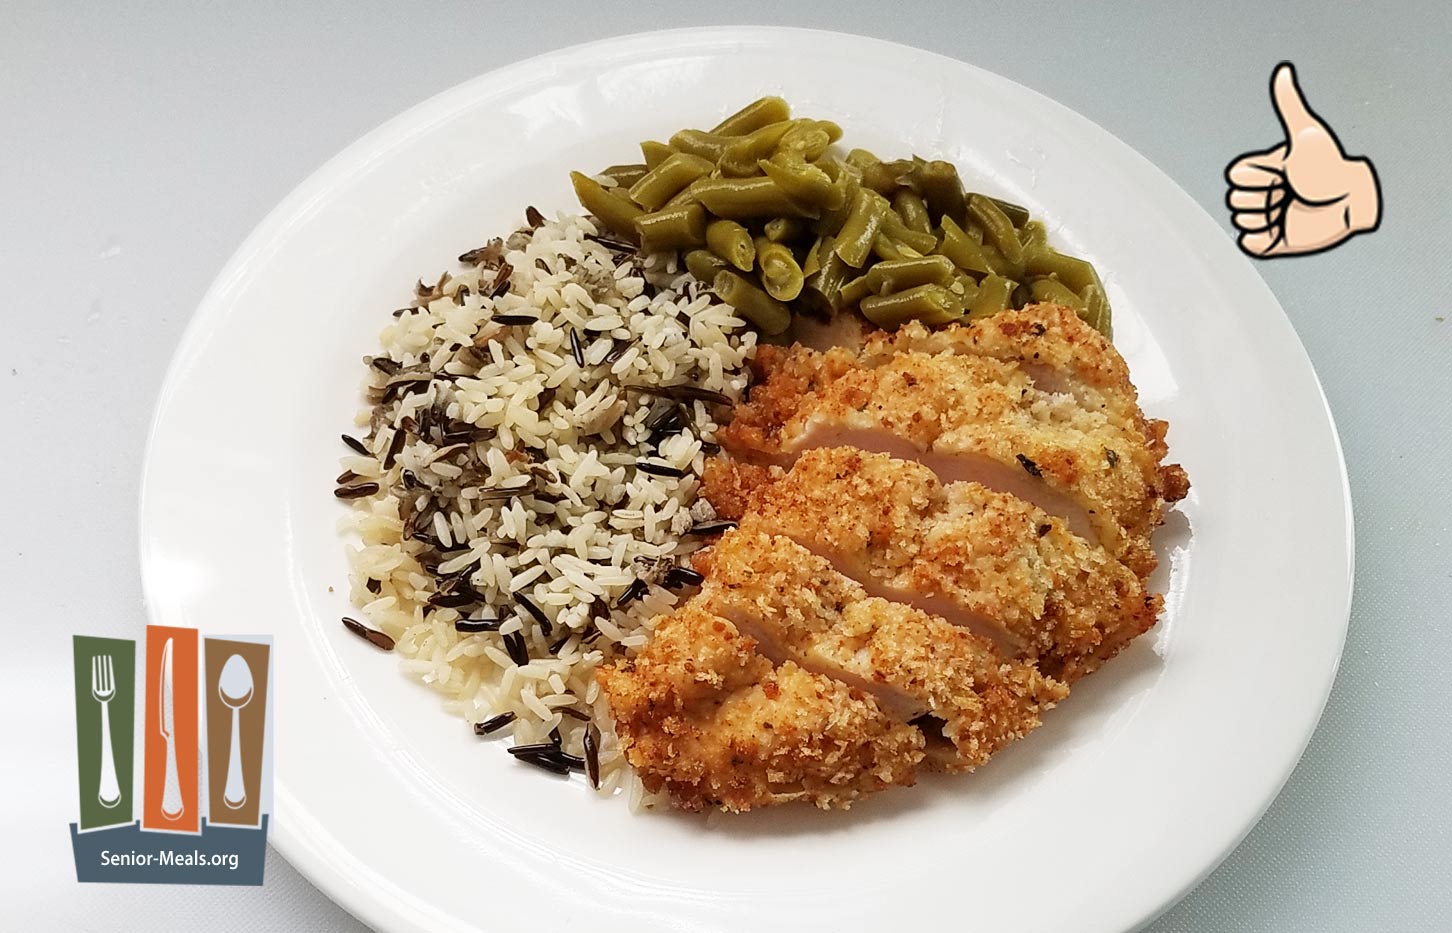 Chicken Cutlet with White and Wild Rice and Green Beans - $8